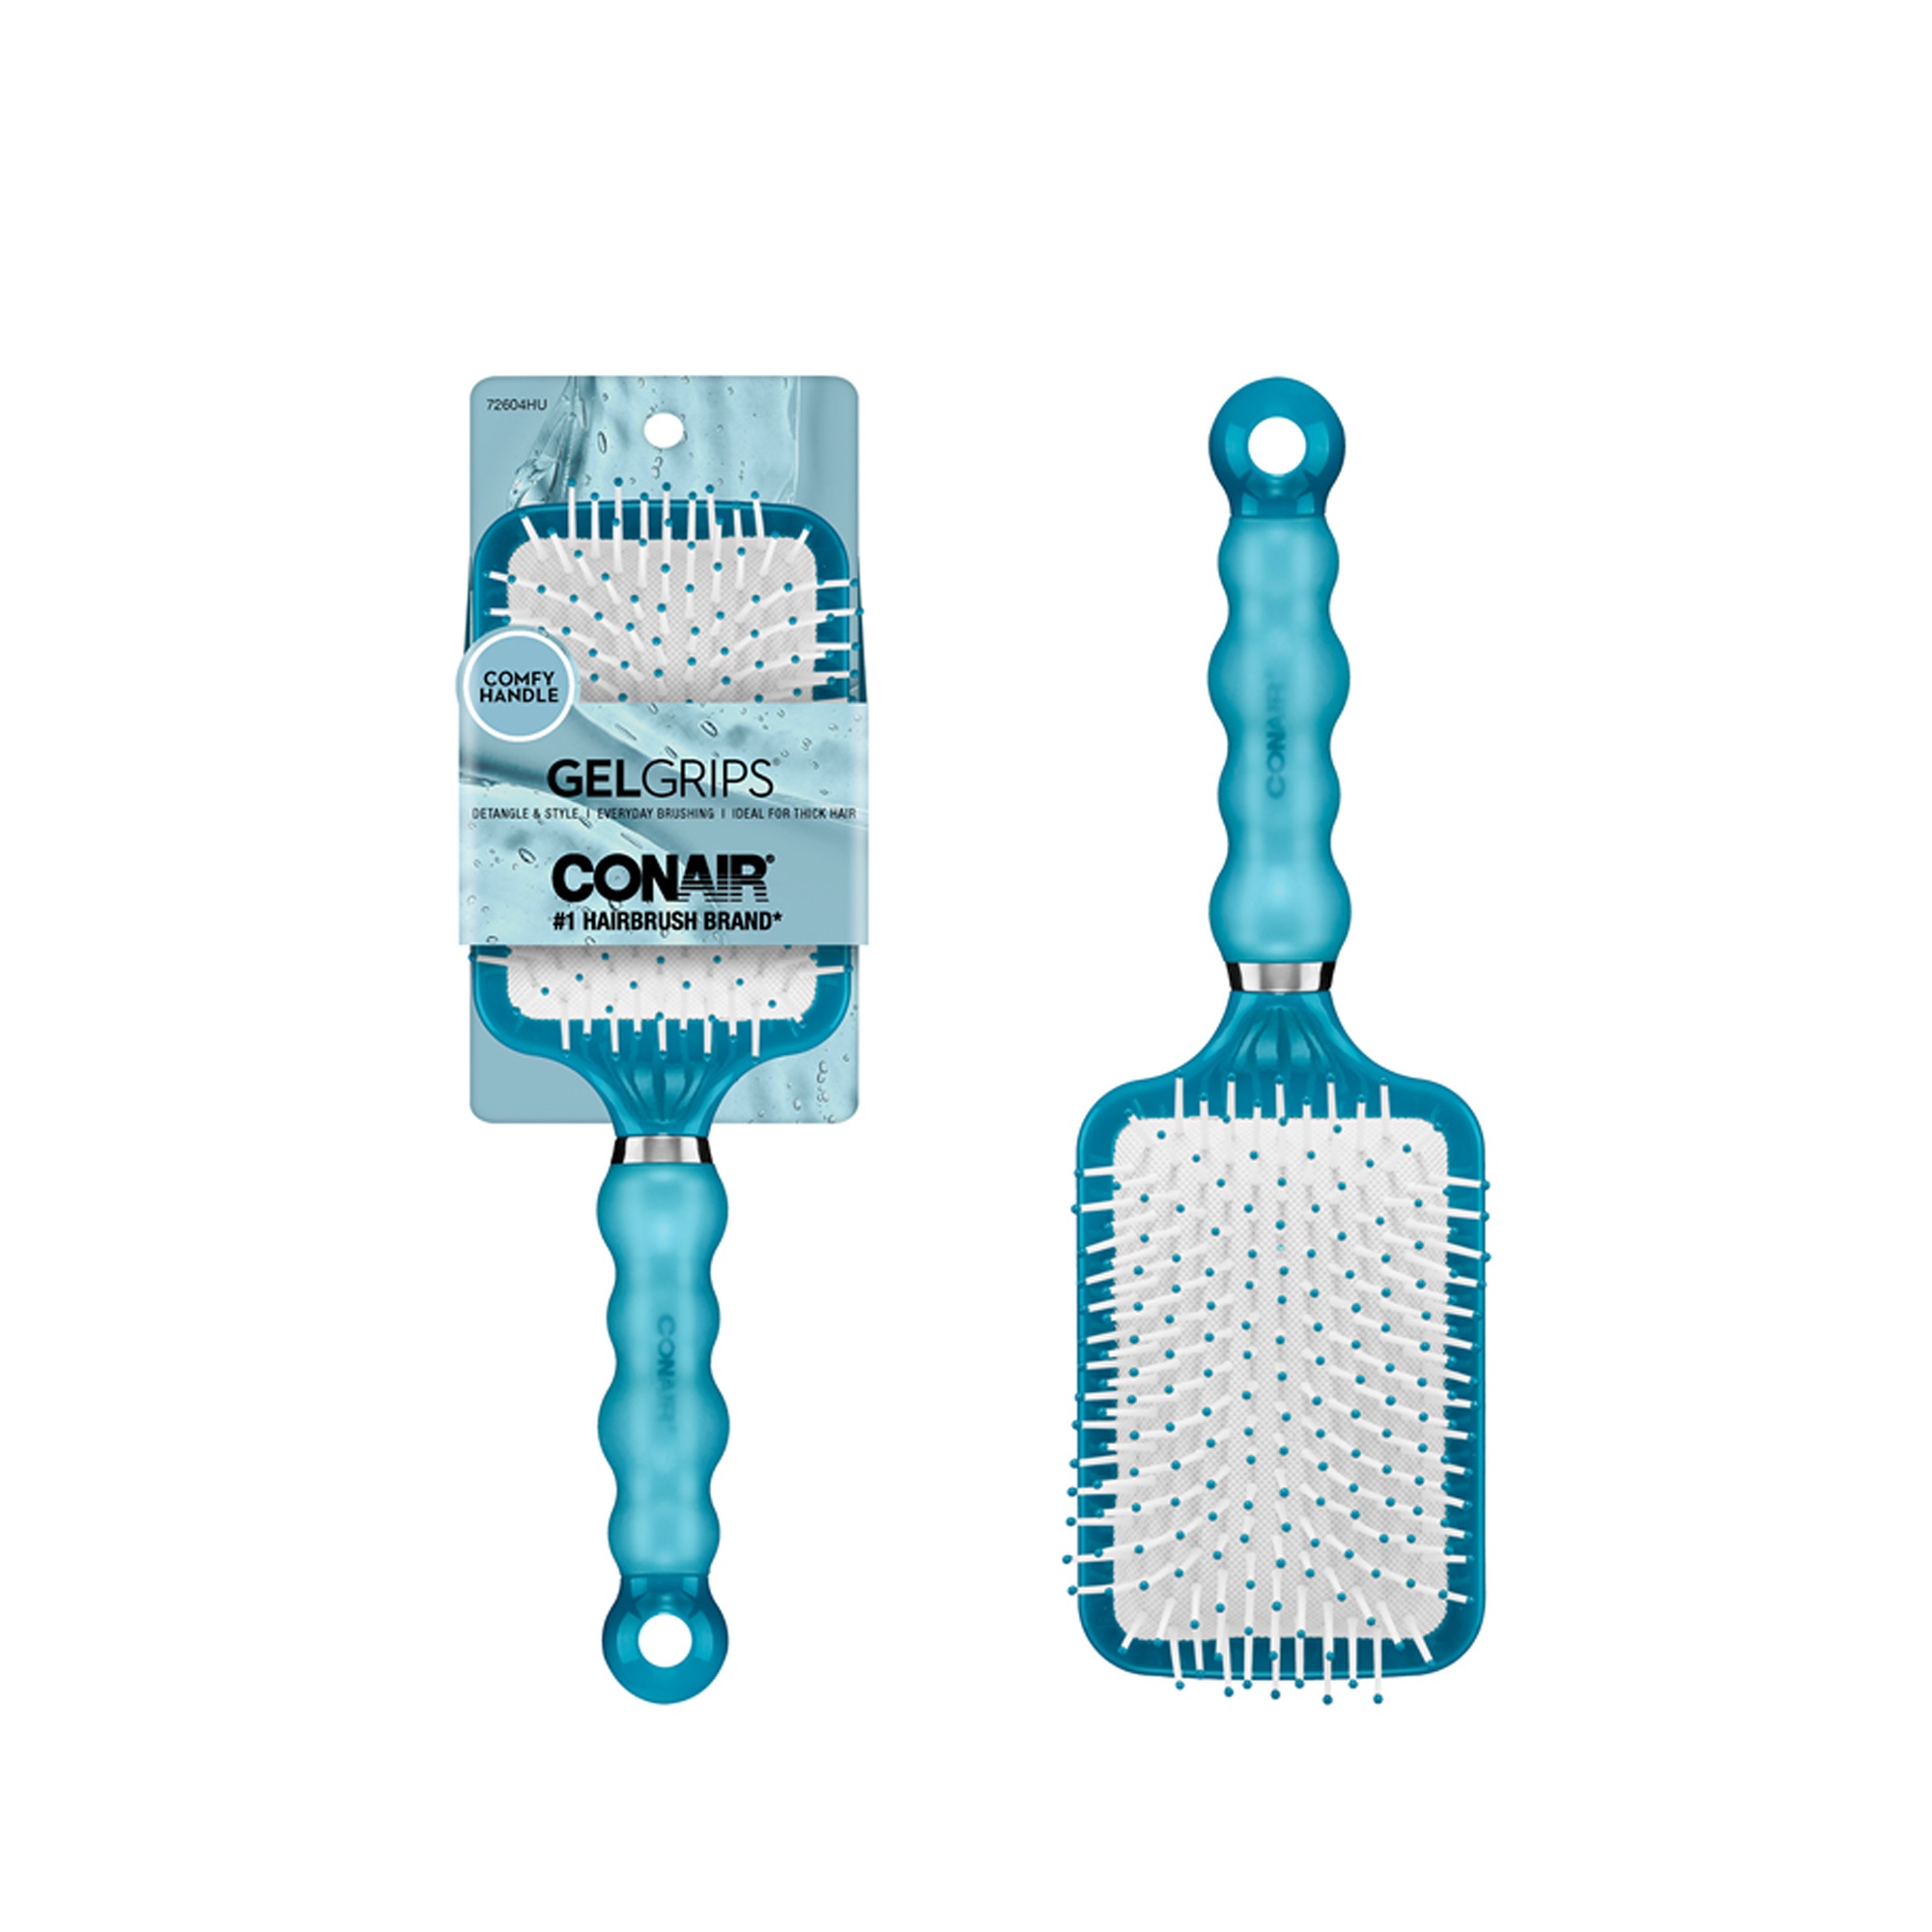 Conair Gel Grip Nylon Bristle Paddle Hairbrush with Comfy Handle, Colors Vary - image 5 of 8